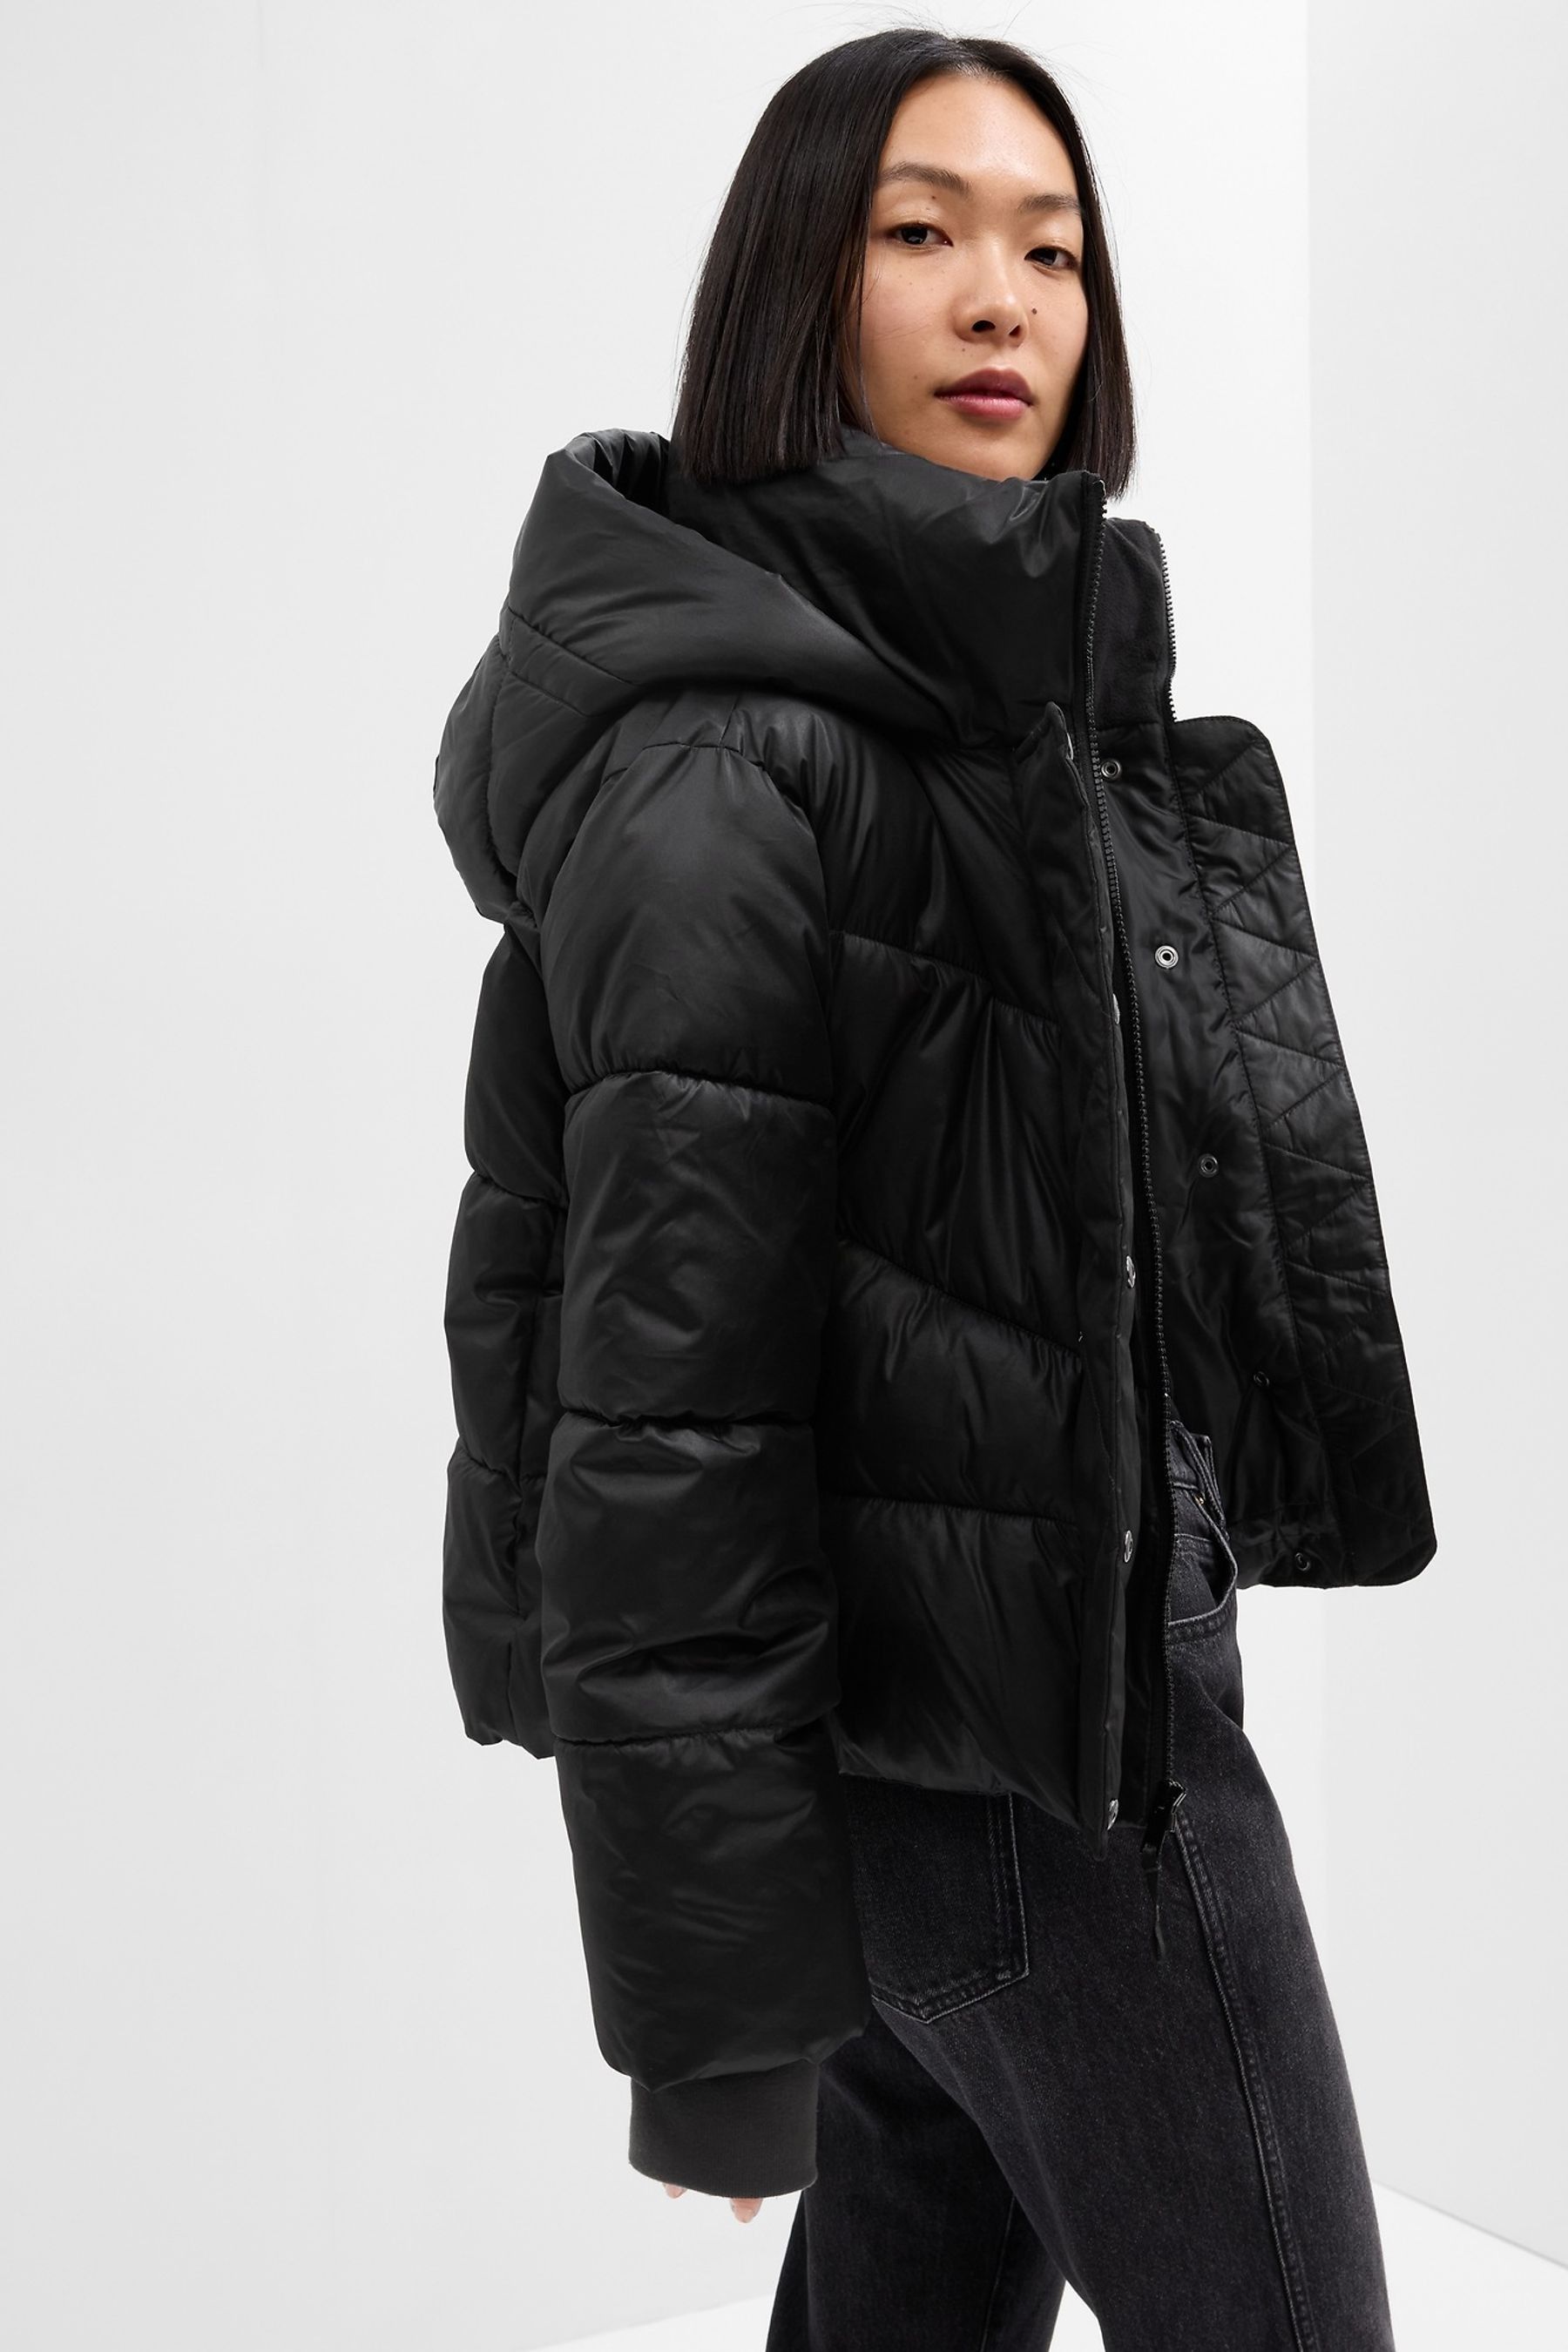 Buy Black Cropped ColdControl Max Puffer Coat from the Gap online shop